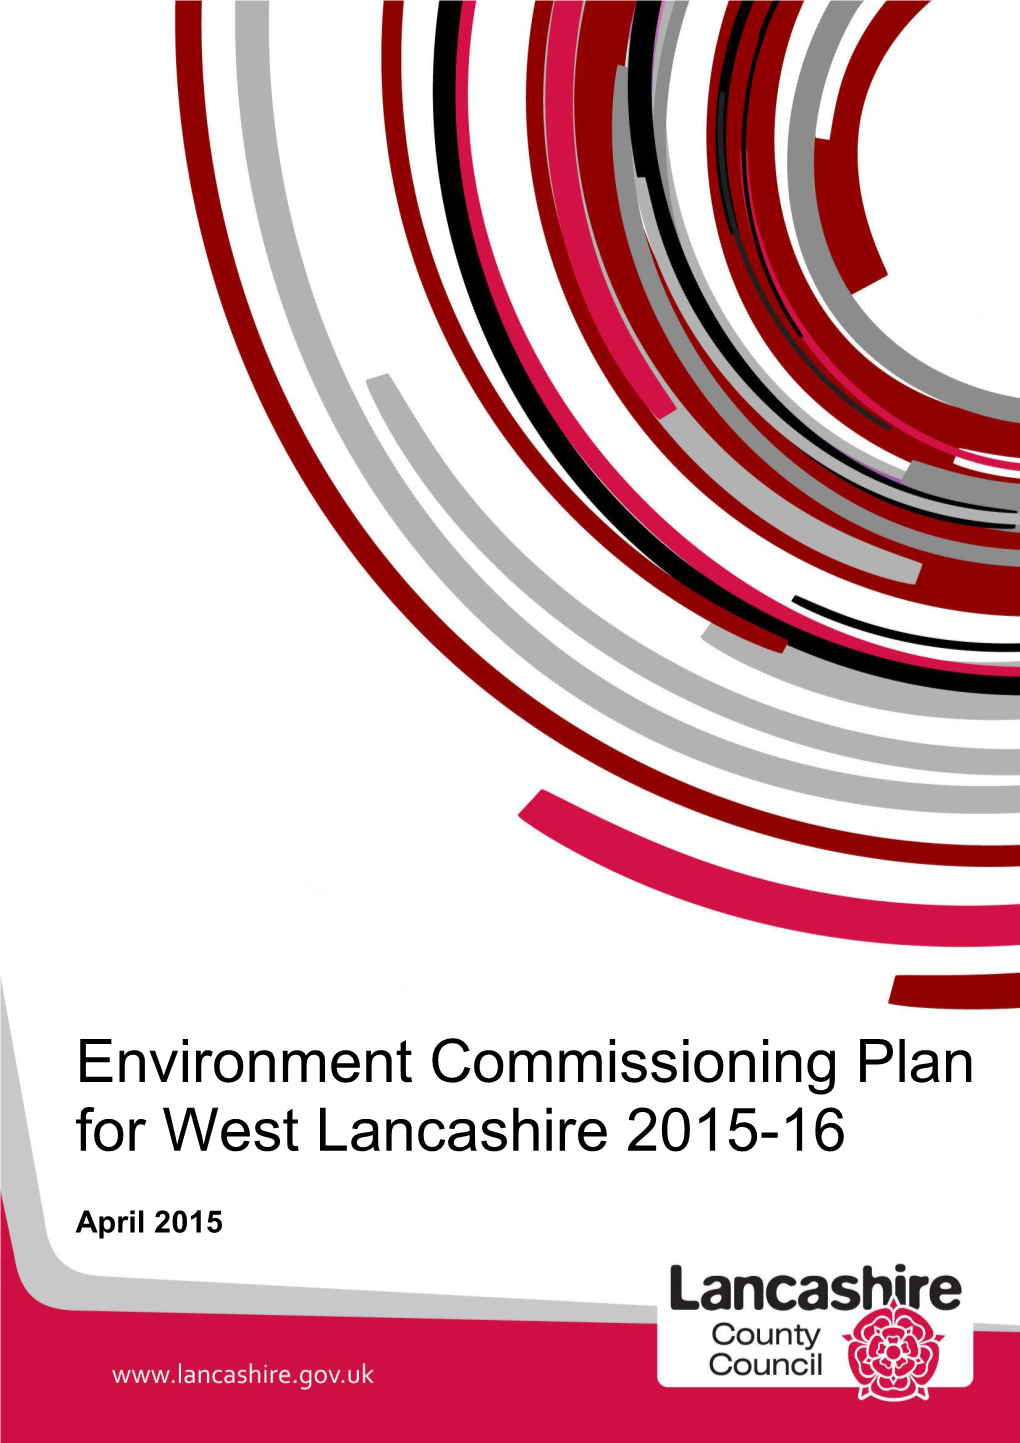 Environment Commissioning Plan for West Lancashire 2015-16